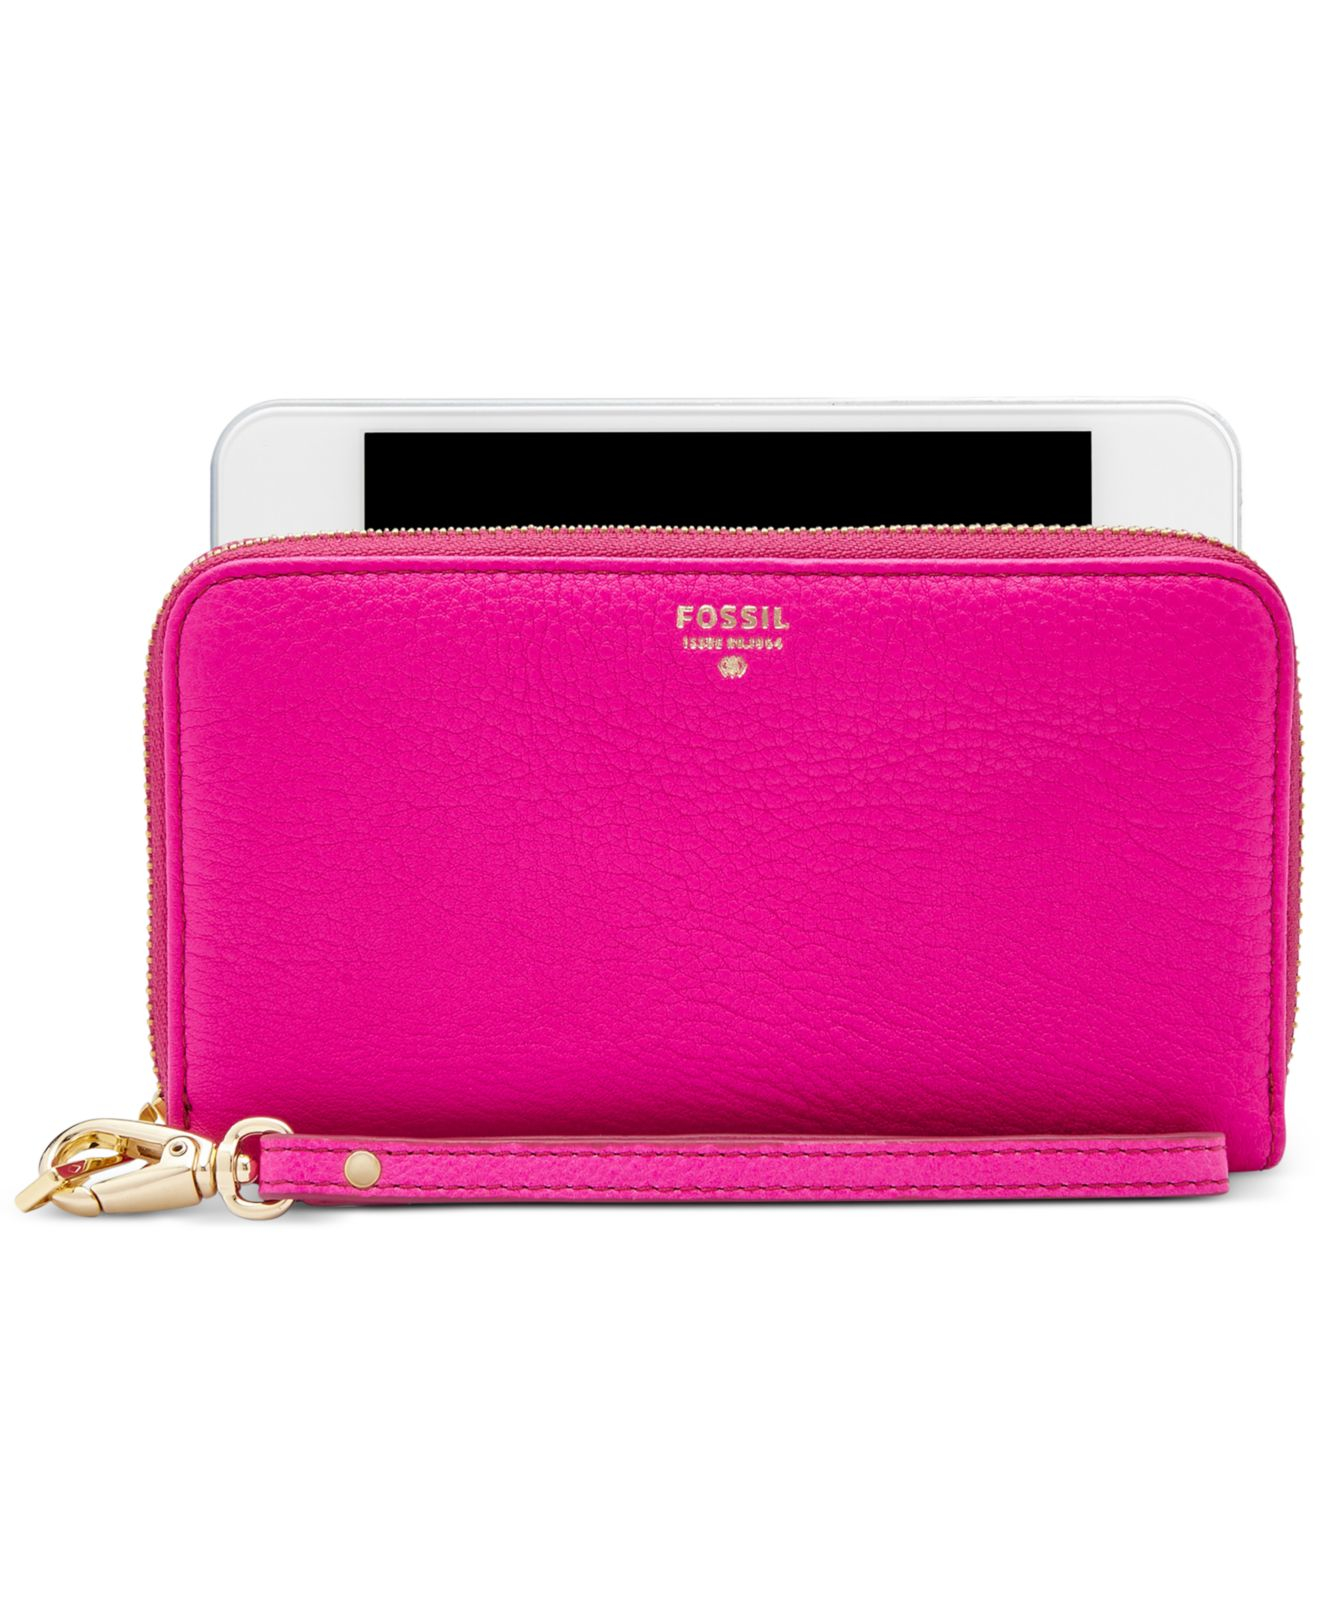 Fossil Sydney Leather Zip Phone Wallet in Hot Pink (Pink) - Lyst